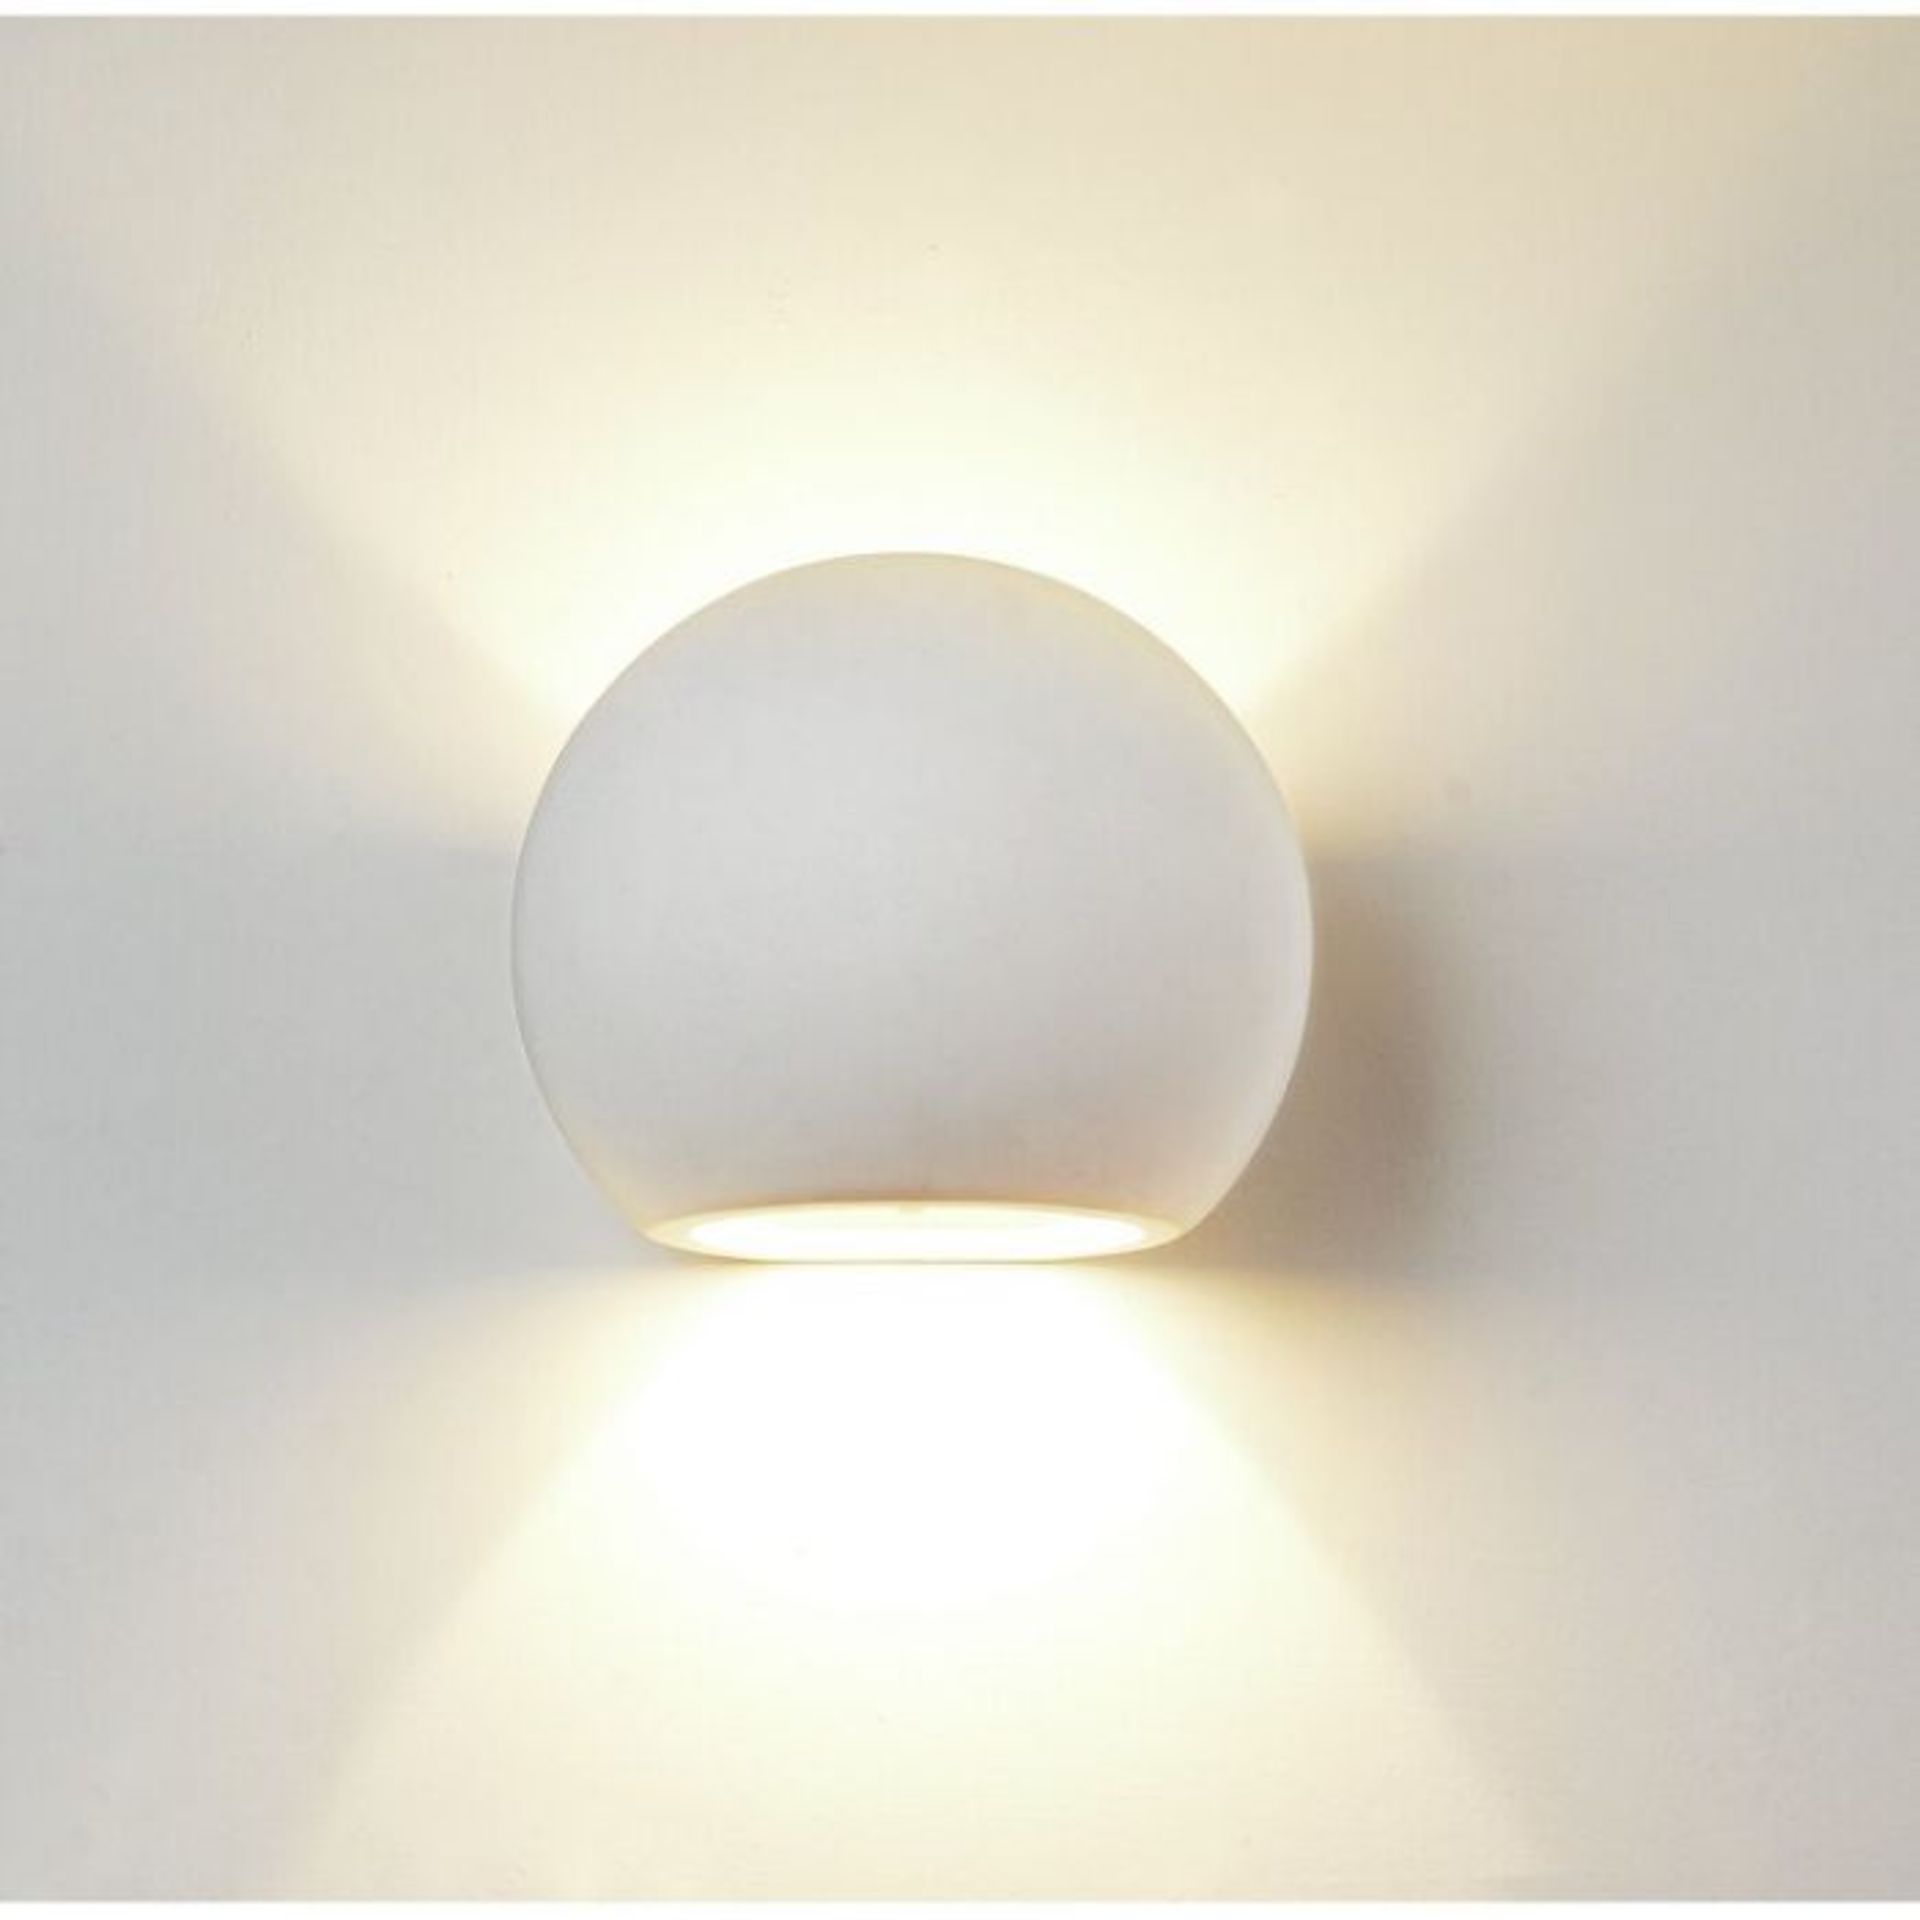 17 Stories, Blandford 1-Light Up and Downlight (PLASTER WHITE) - RRP £34.99 (BDHM1049 - 26509/59)